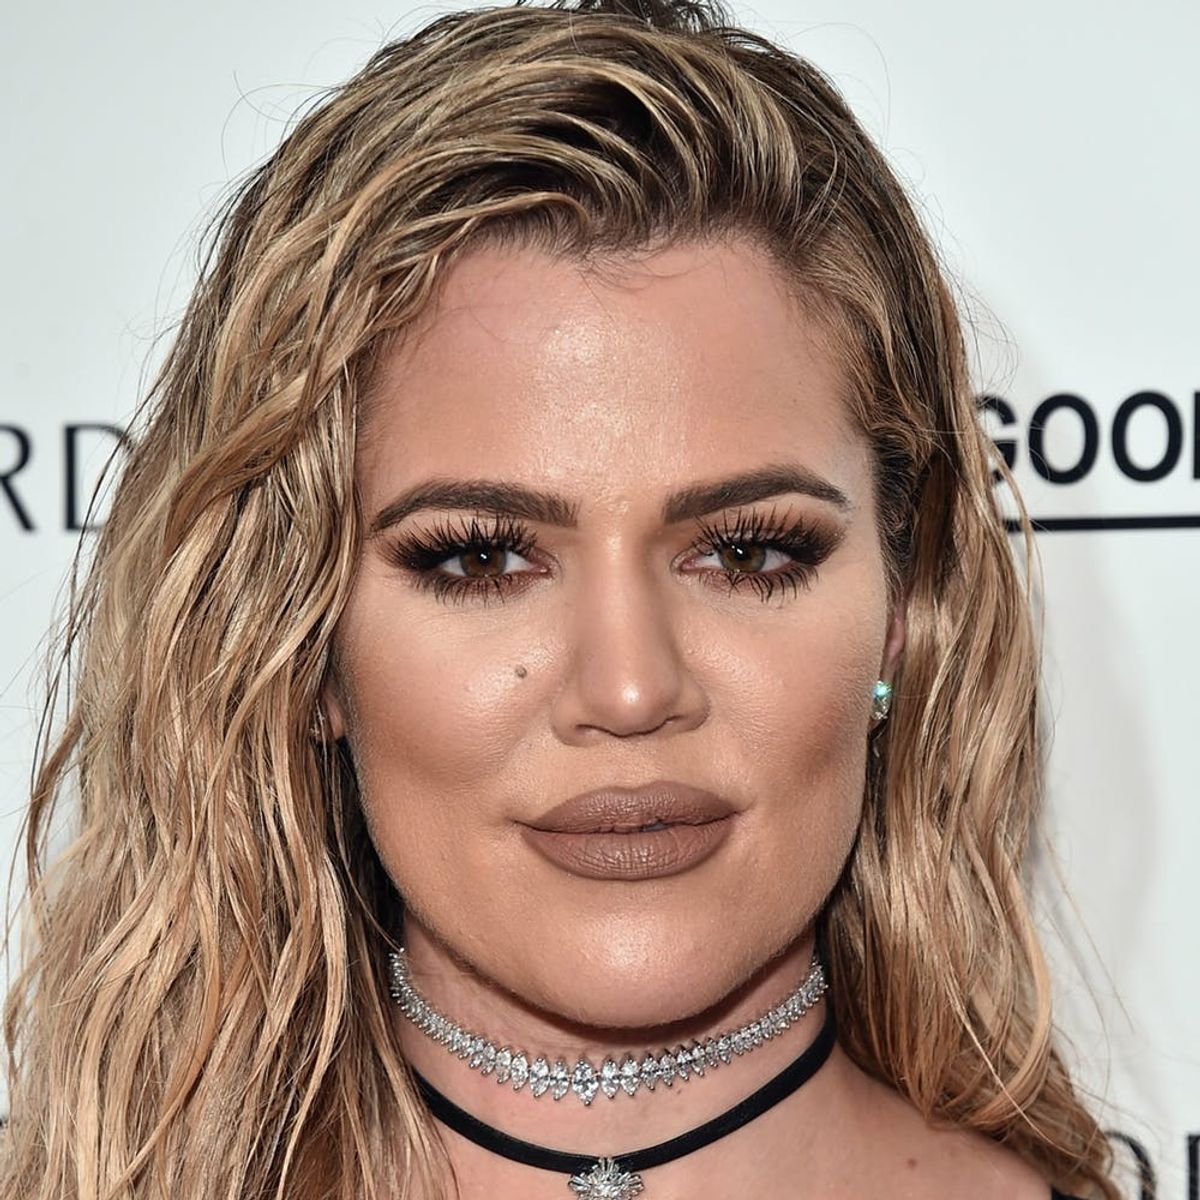 The Contents of Khloe Kardashians Tea Drawer Will Blow Your Mind